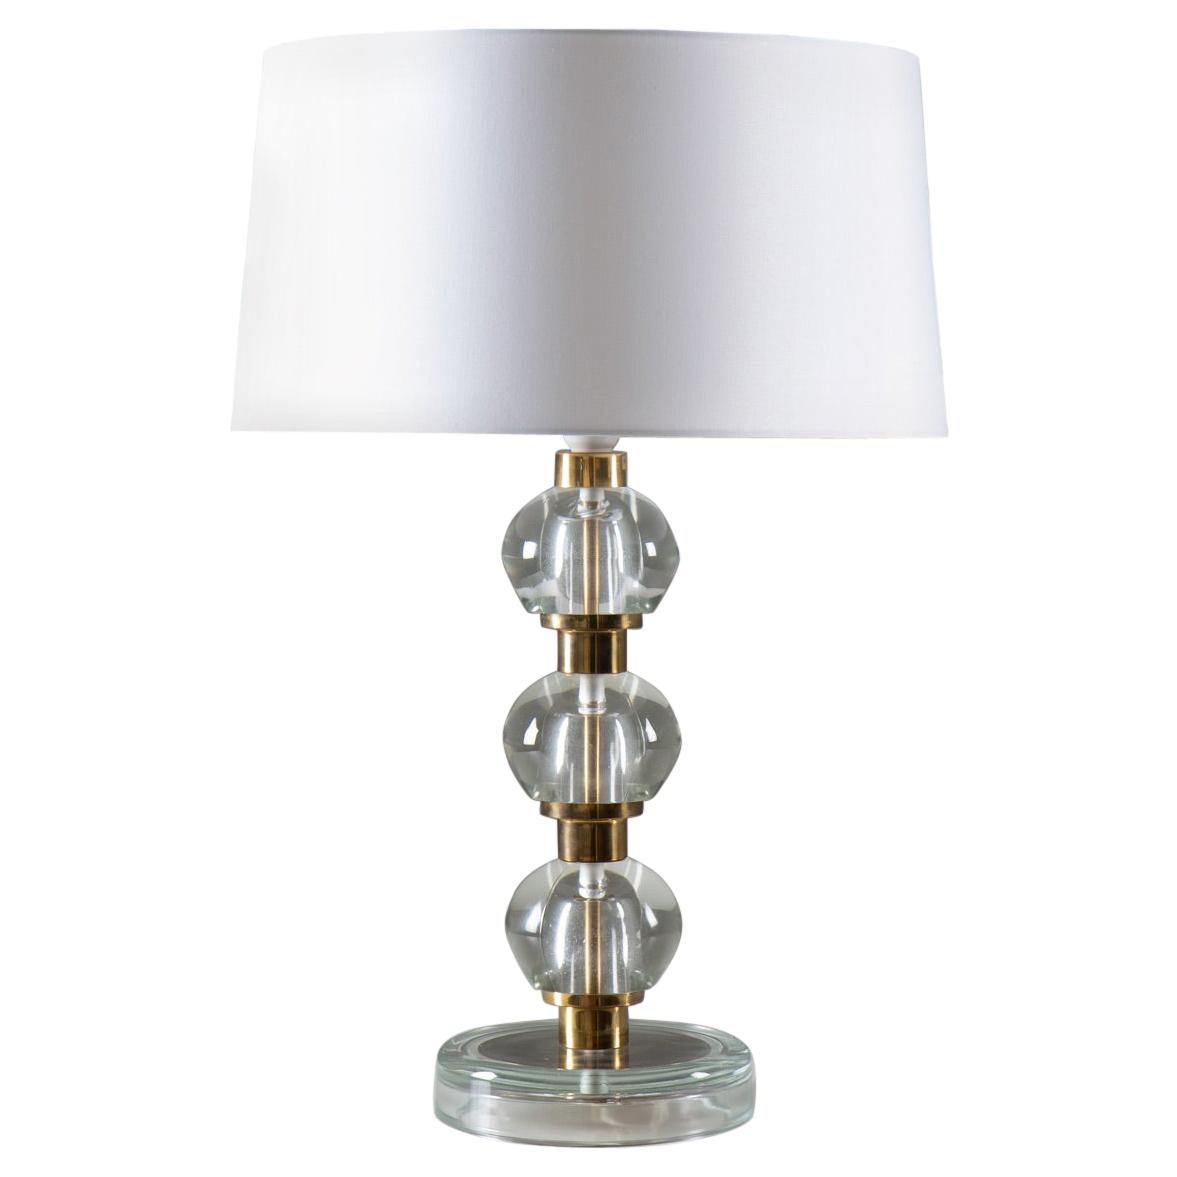 Midcentury Scandinavian Table Lamp in Brass and Glass For Sale